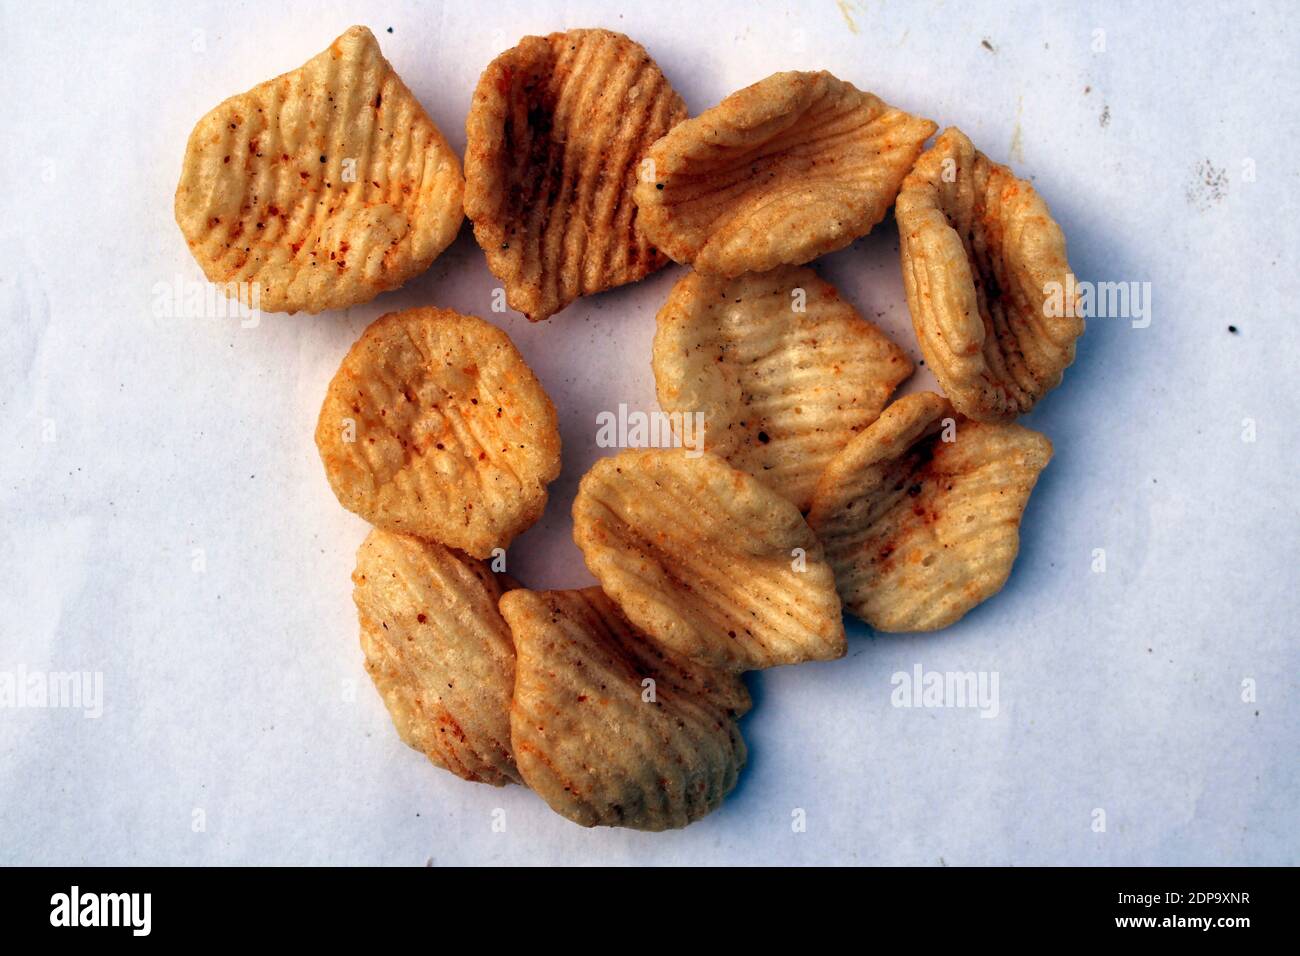 Testy biscuit food photo capture form Bangladesh Stock Photo